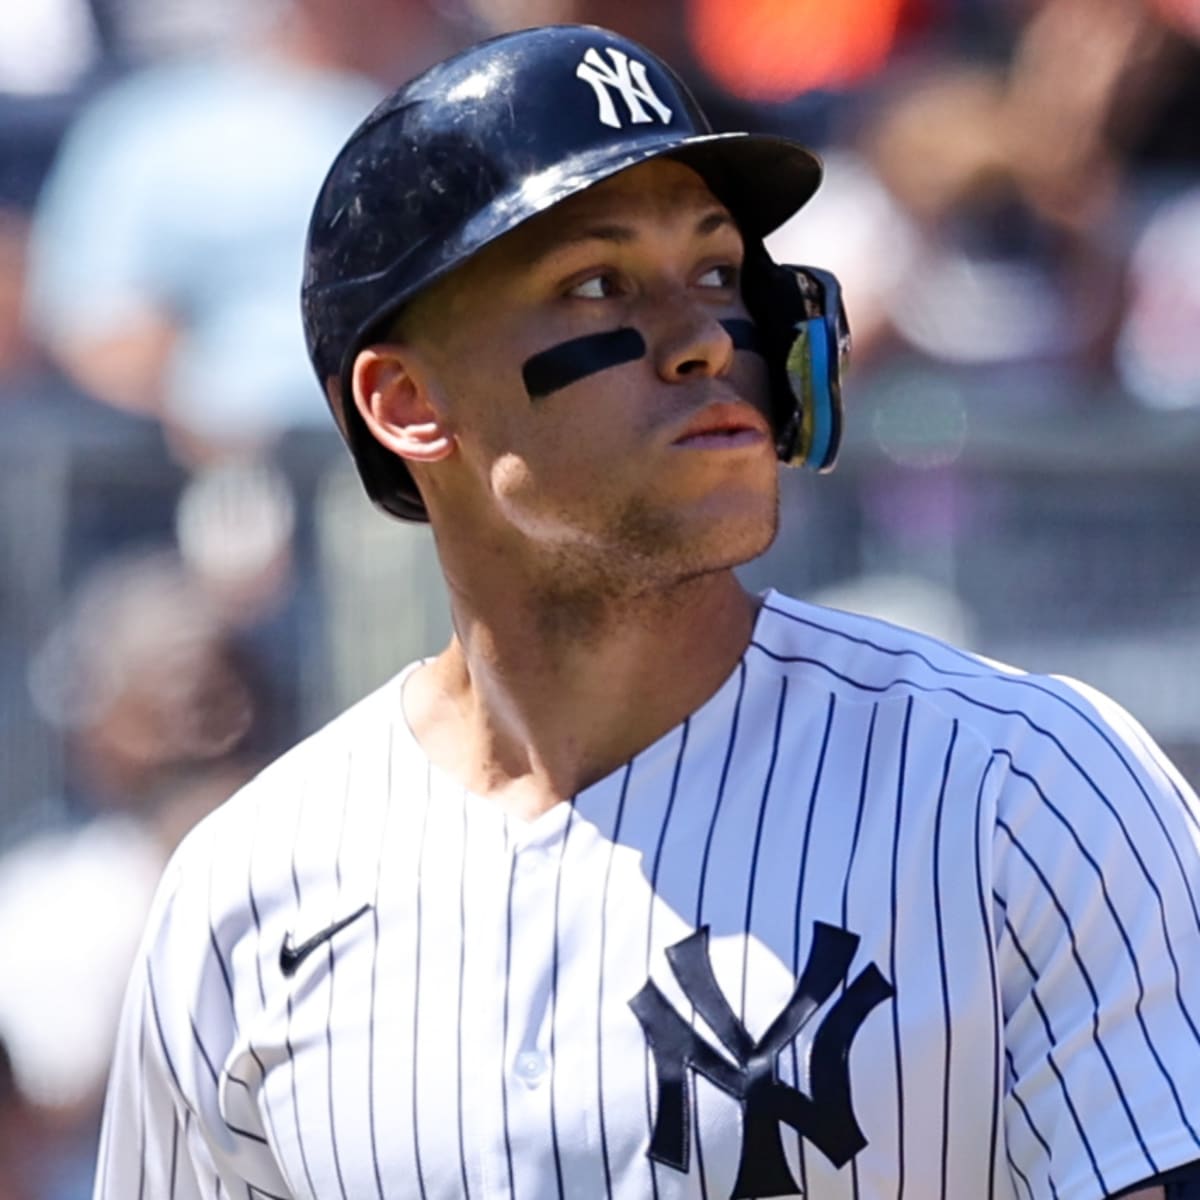 Yankees free agent Aaron Judge gets good news on eve of market opening 